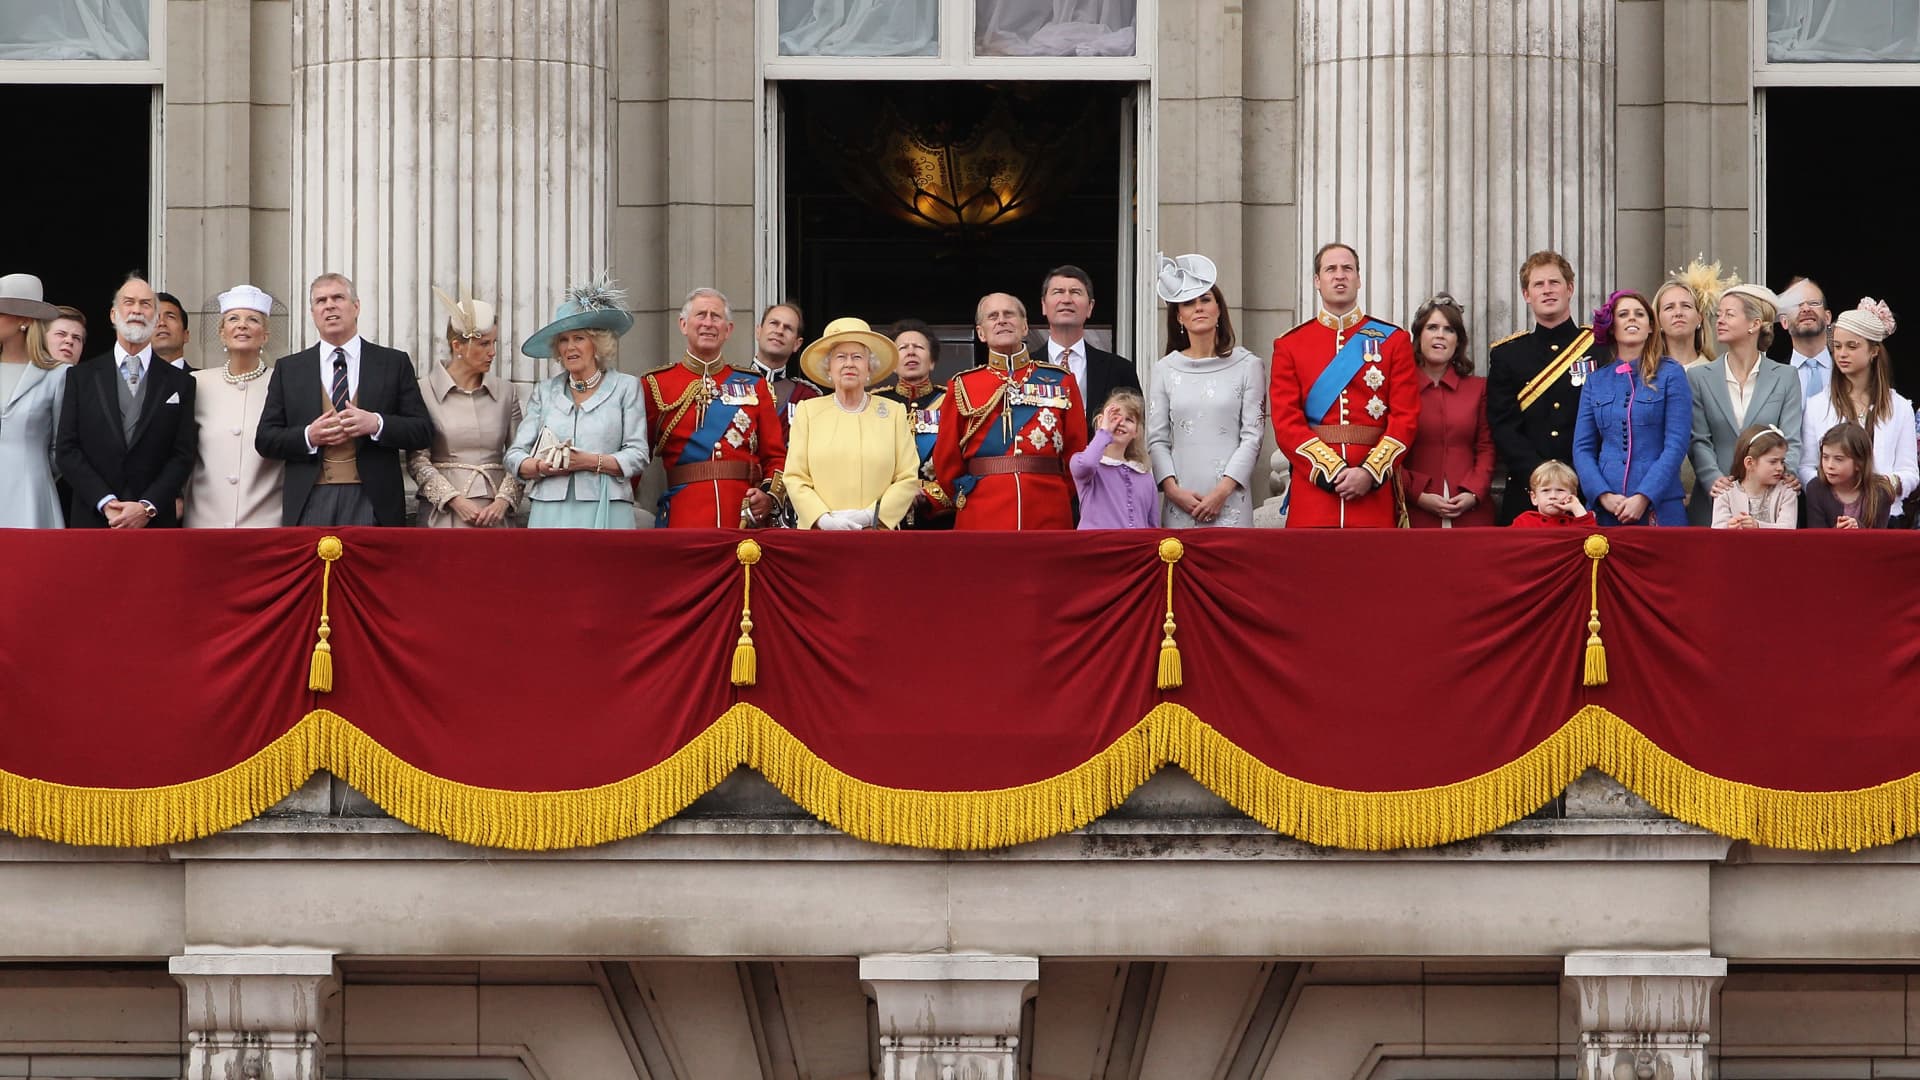 Queen Elizabeth II and Prince Philip are joined by members of the royal family on the balcony of Buckingham Palace after the Trooping the Colour ceremony.